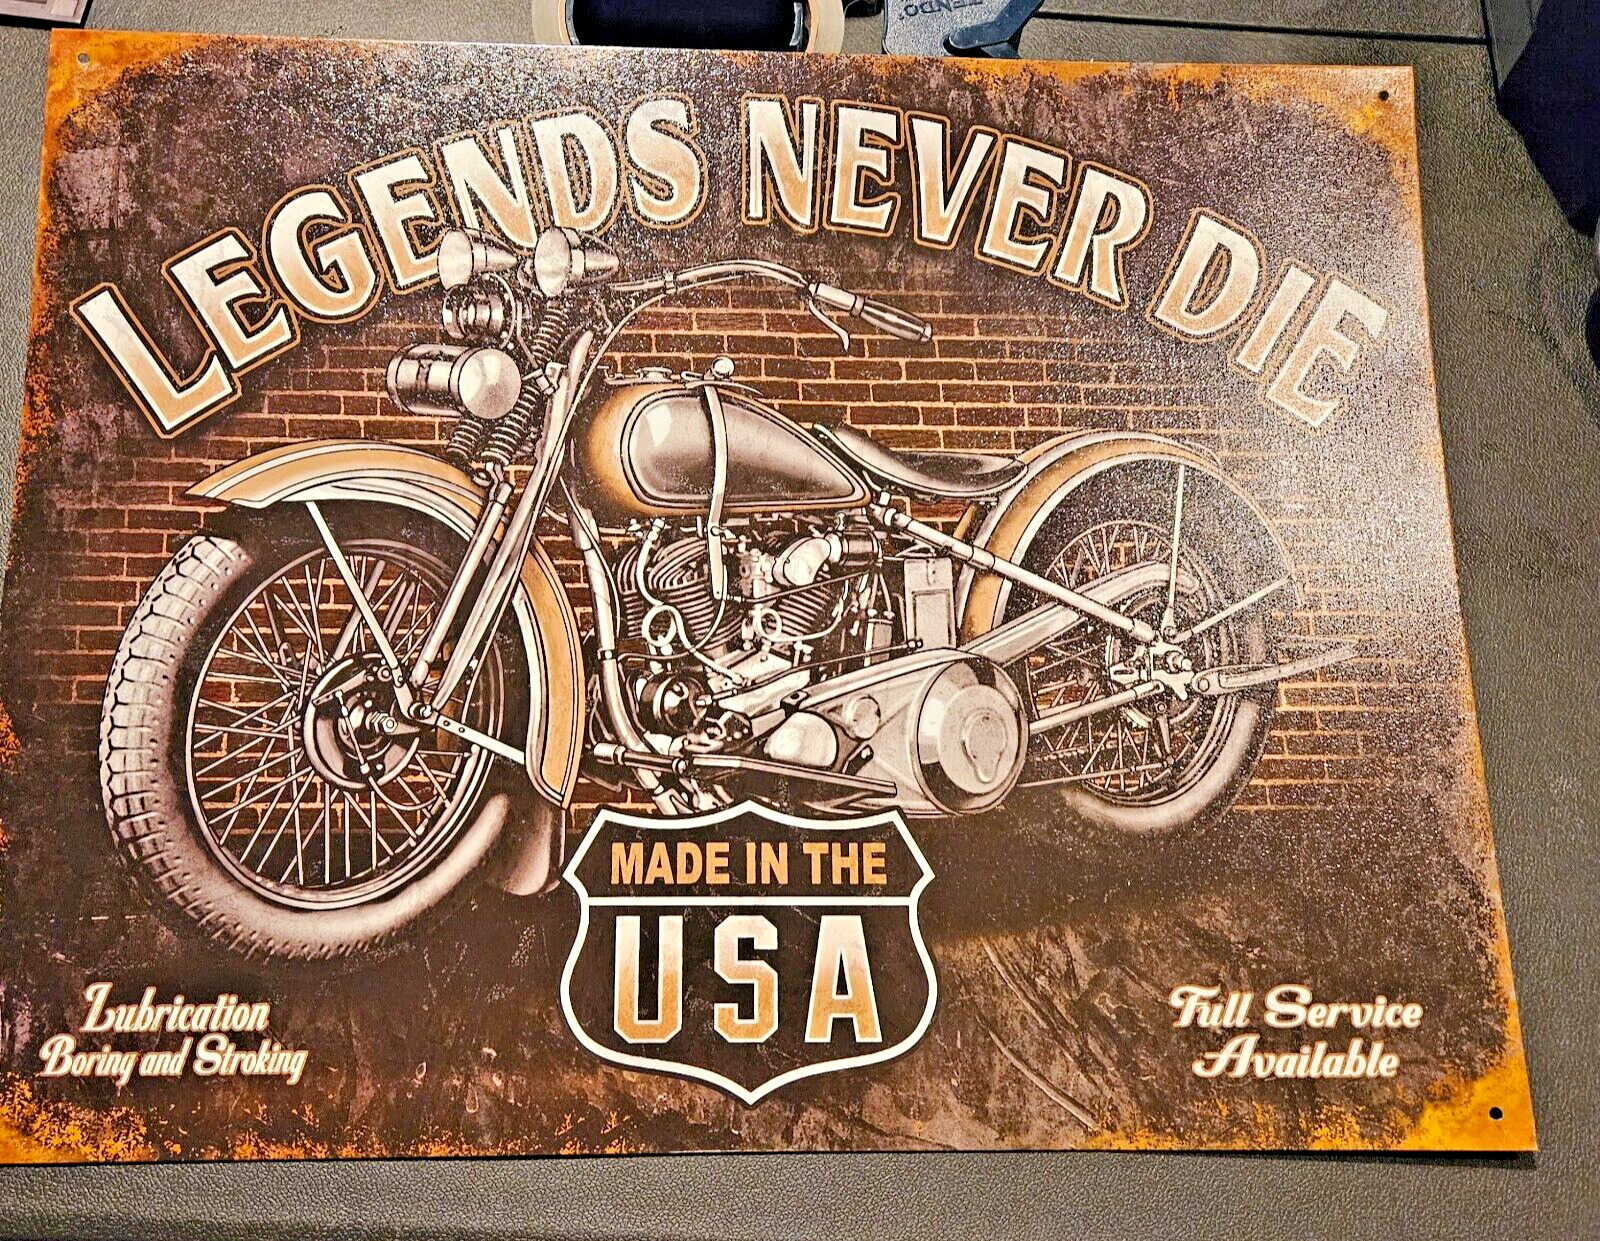 Legends Never Die,Tin Metal Sign,Motorcycle,Biker,Made In USA